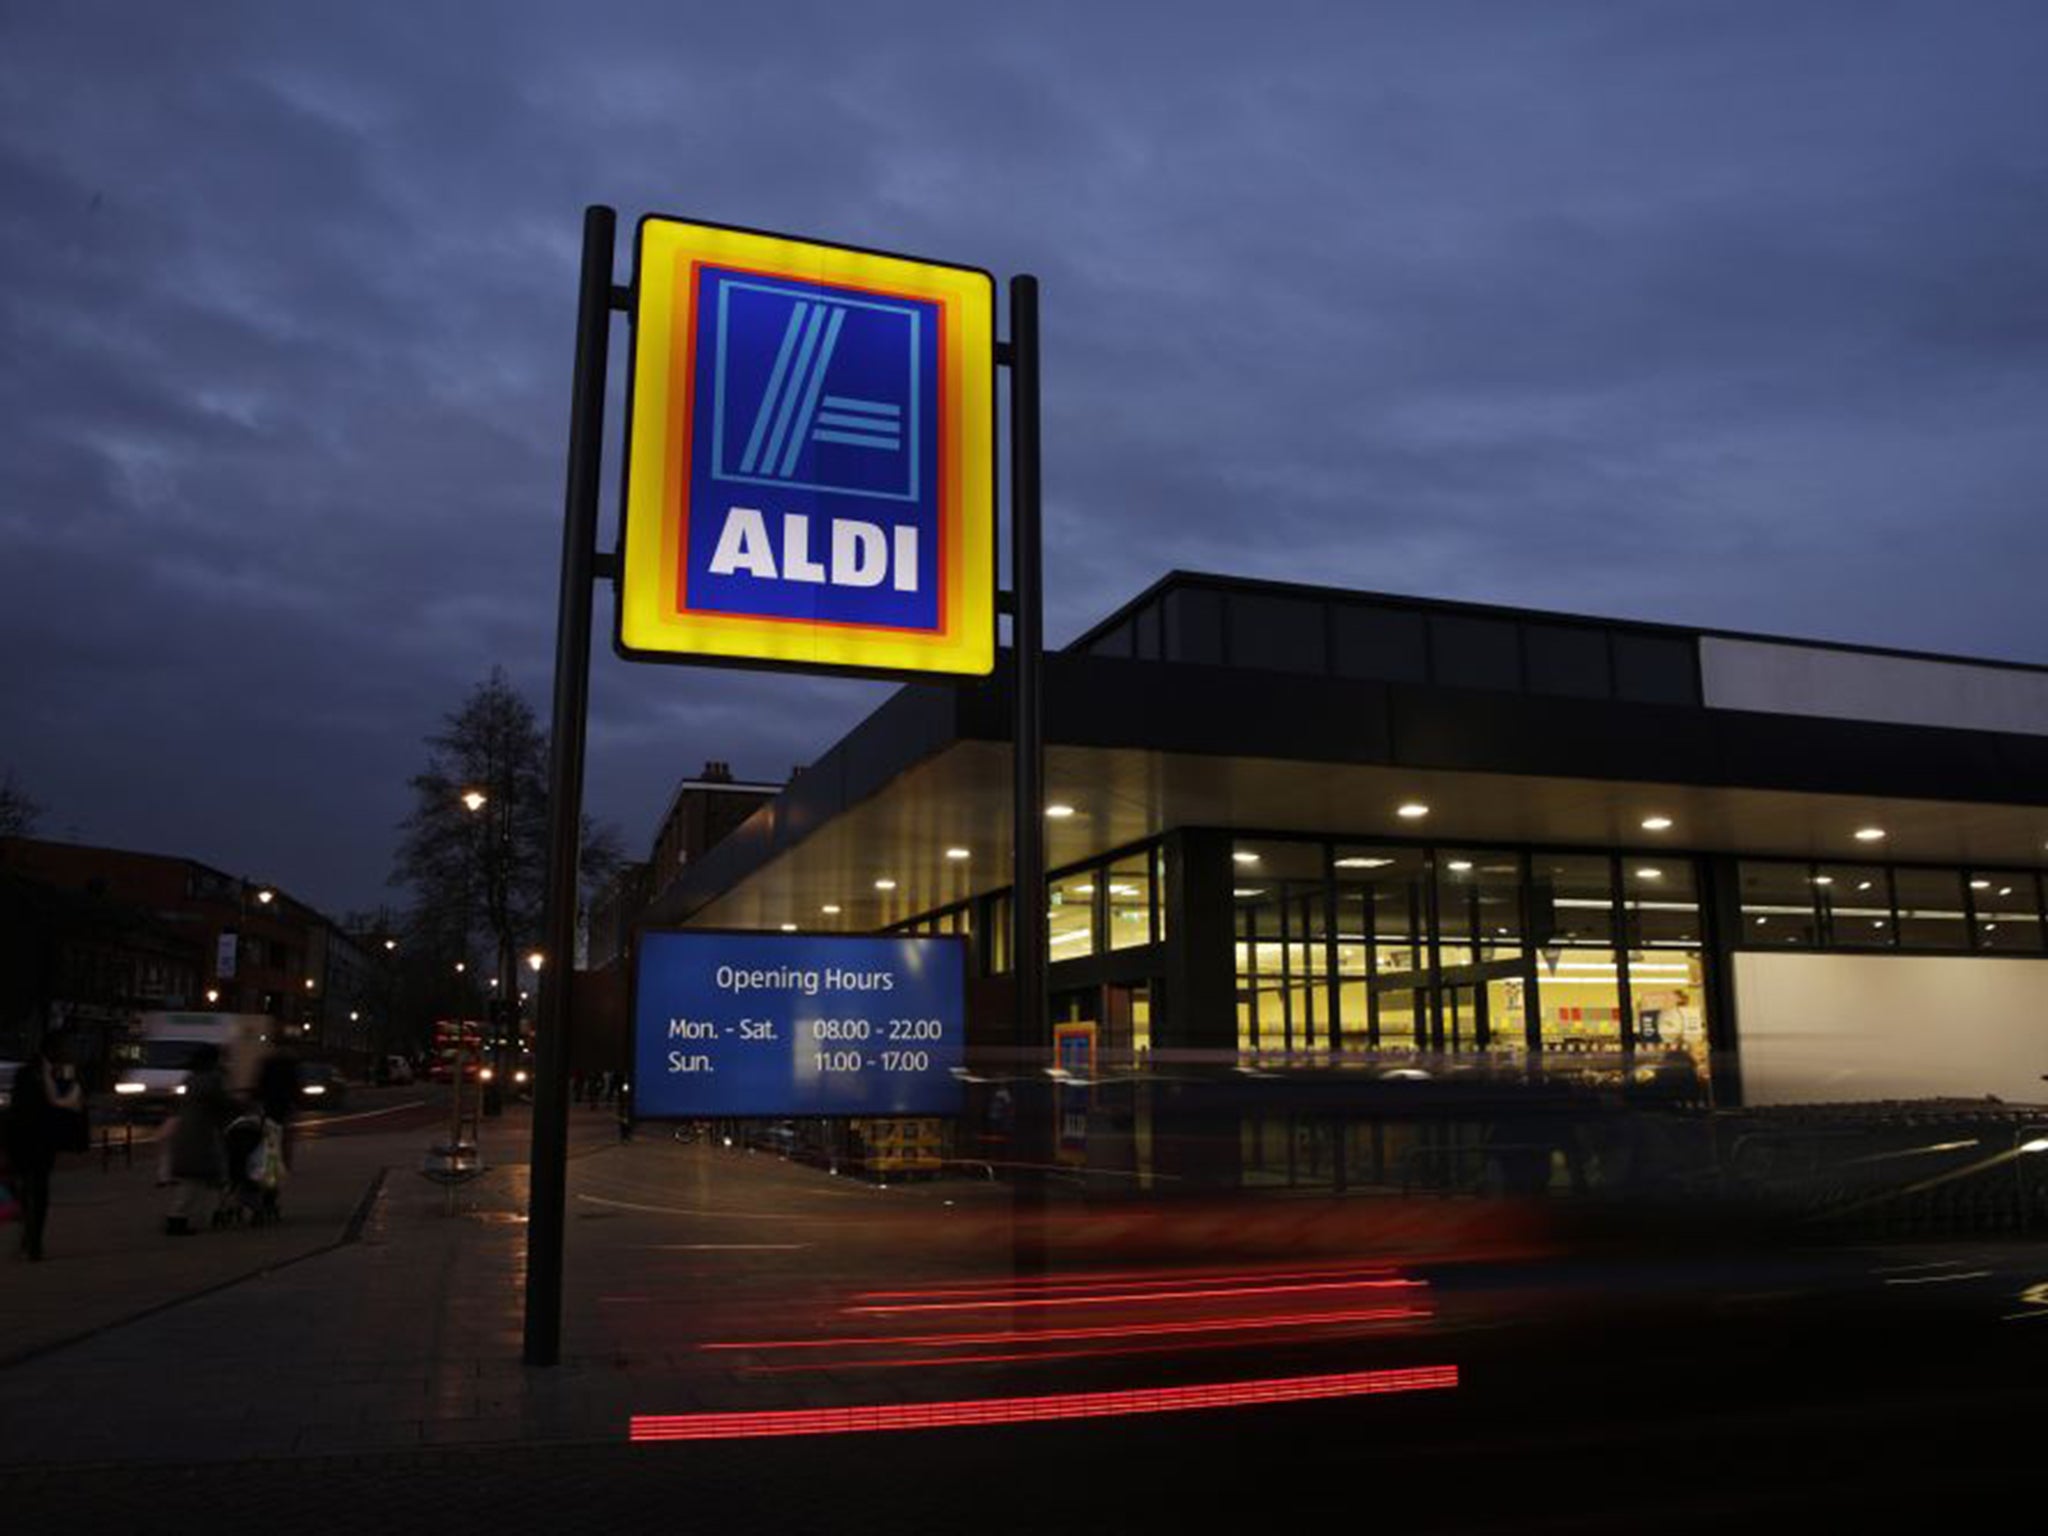 Aldi said around 5000 workers would benefit from the higher wage